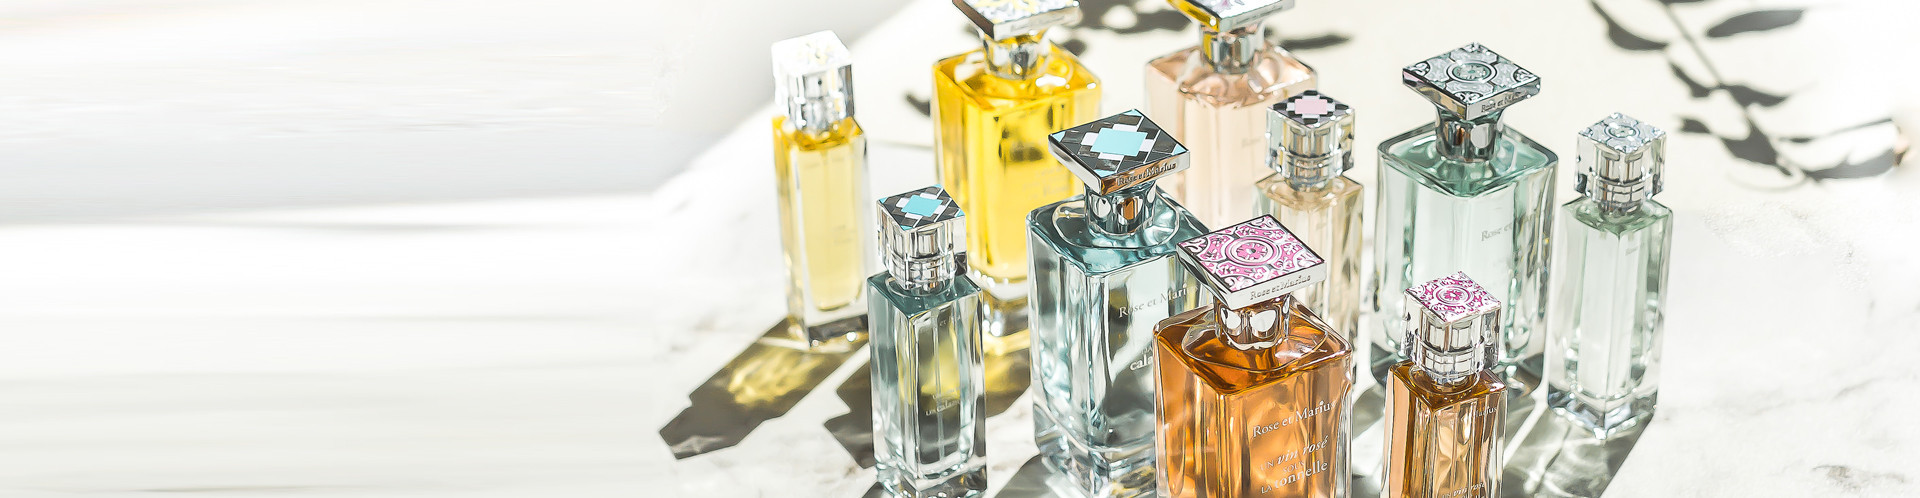 Our rare women's and unisex perfume collection